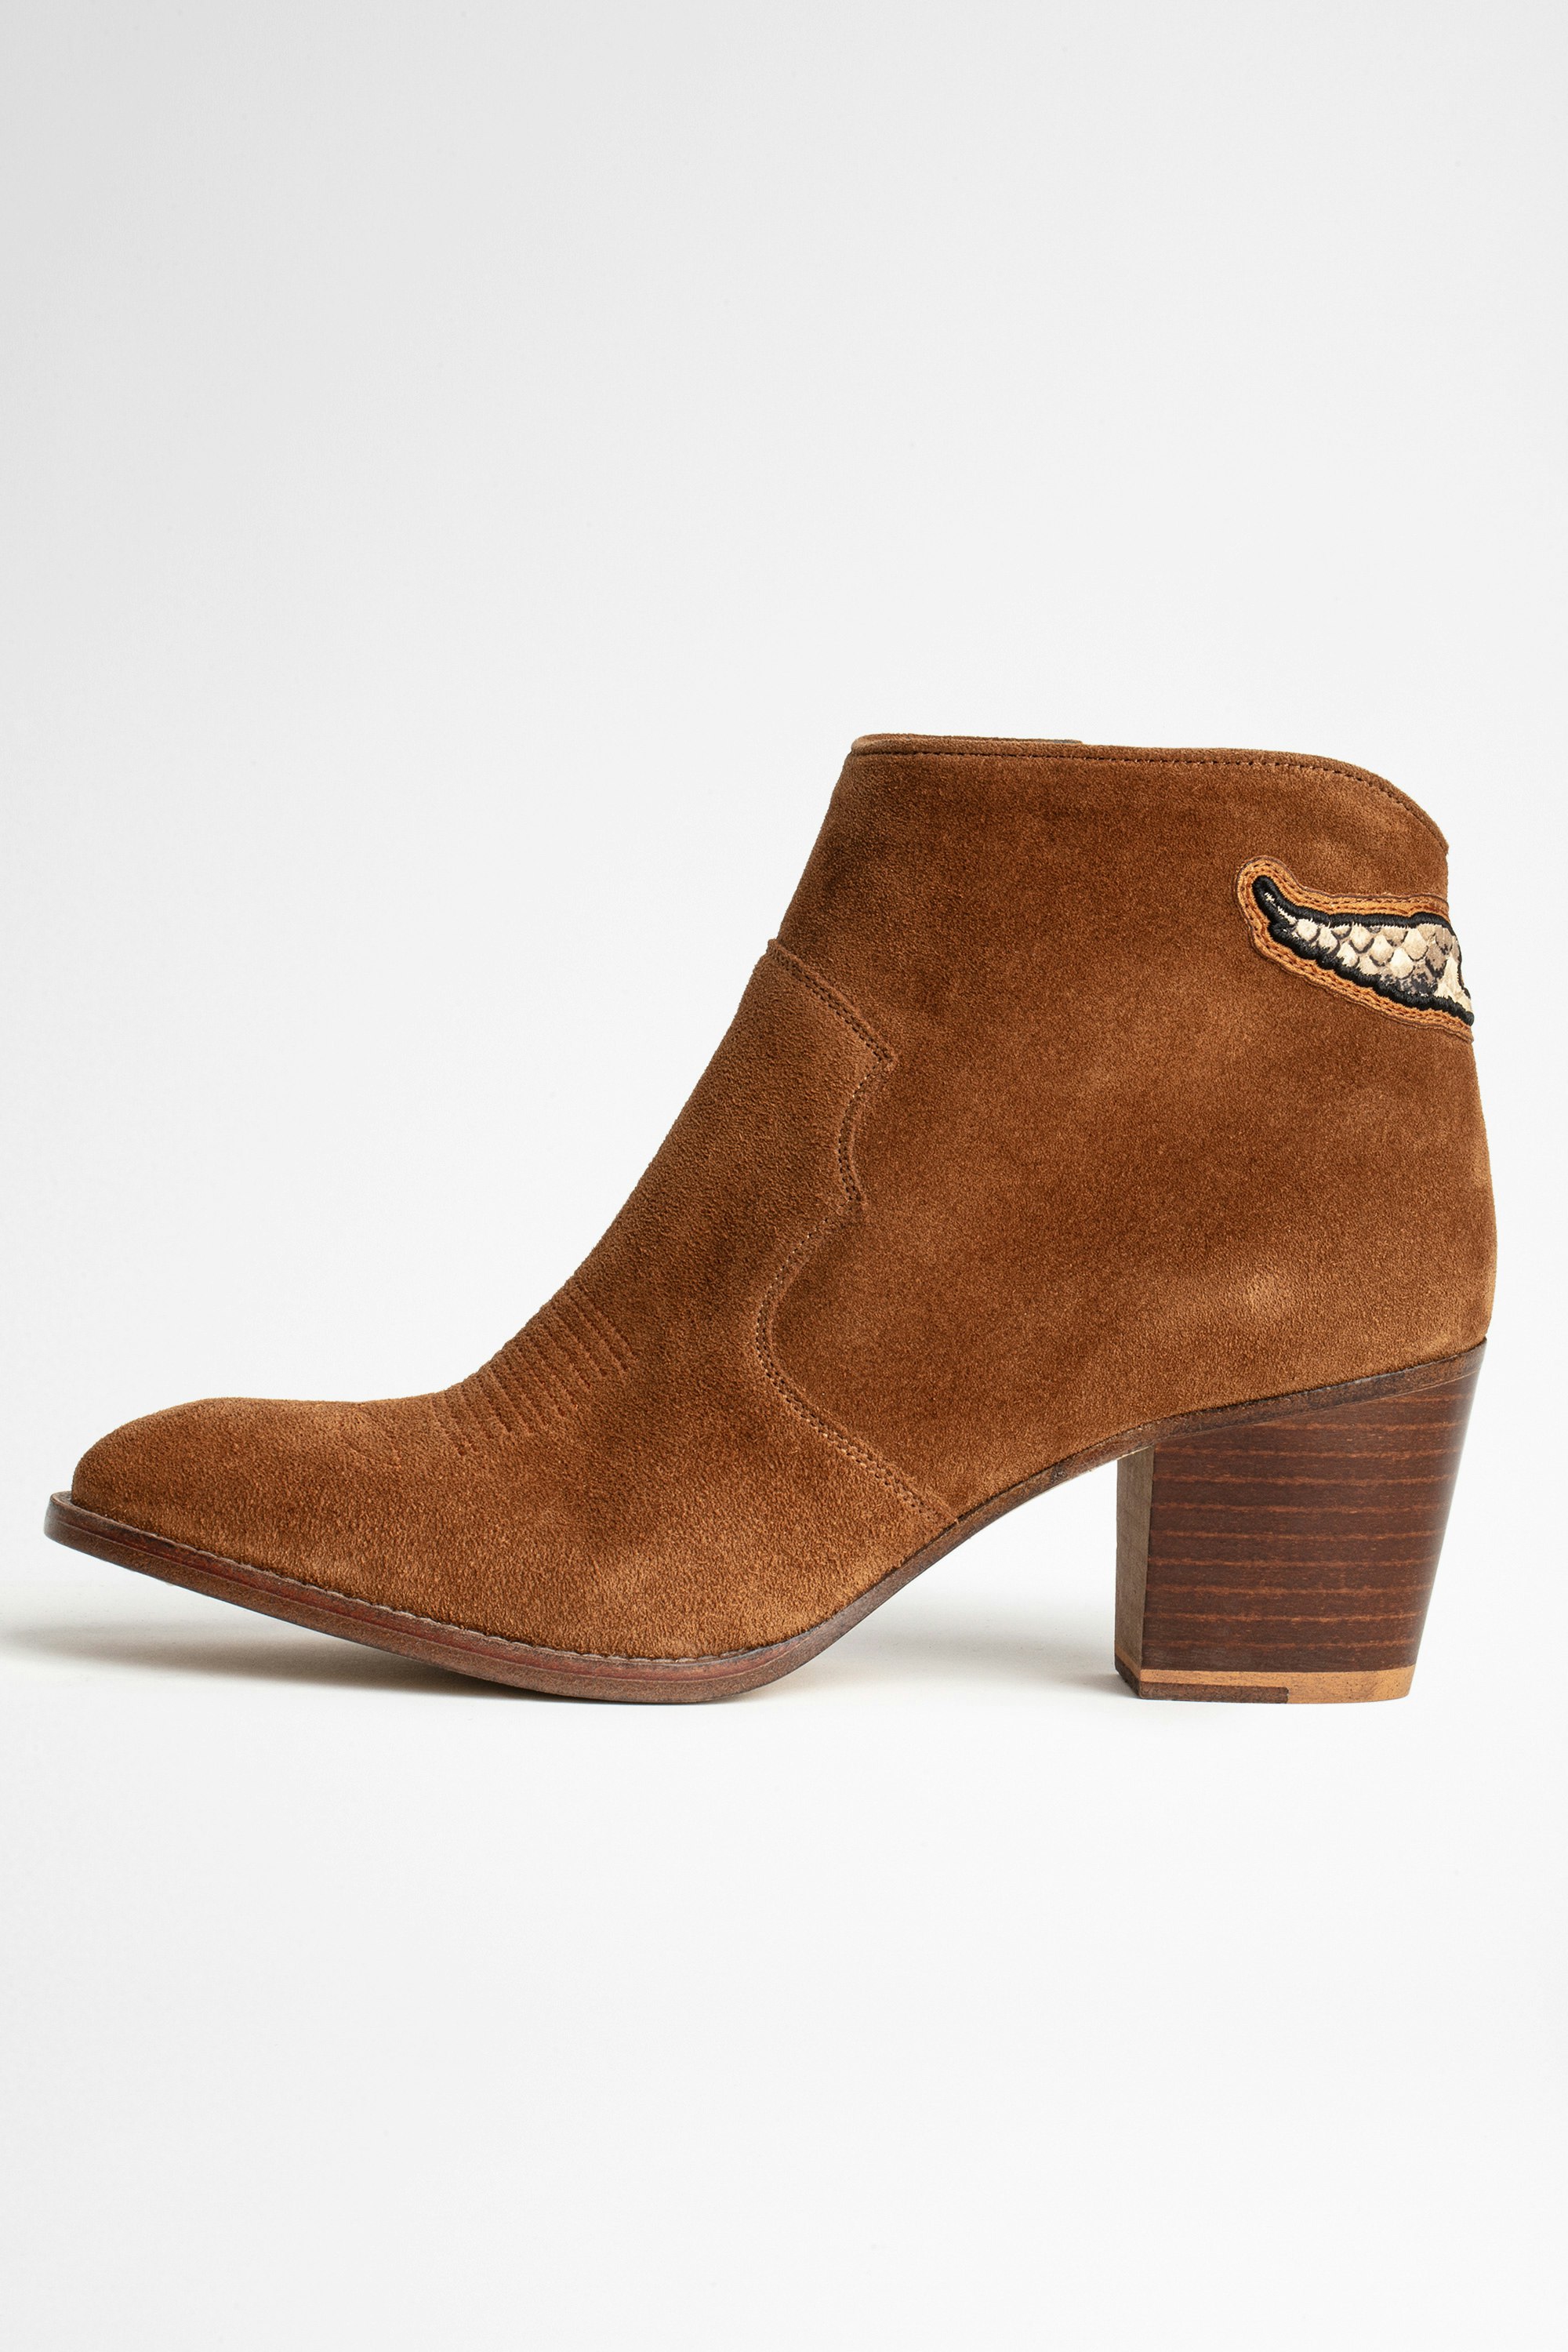 Molly Suede Ankle Boots